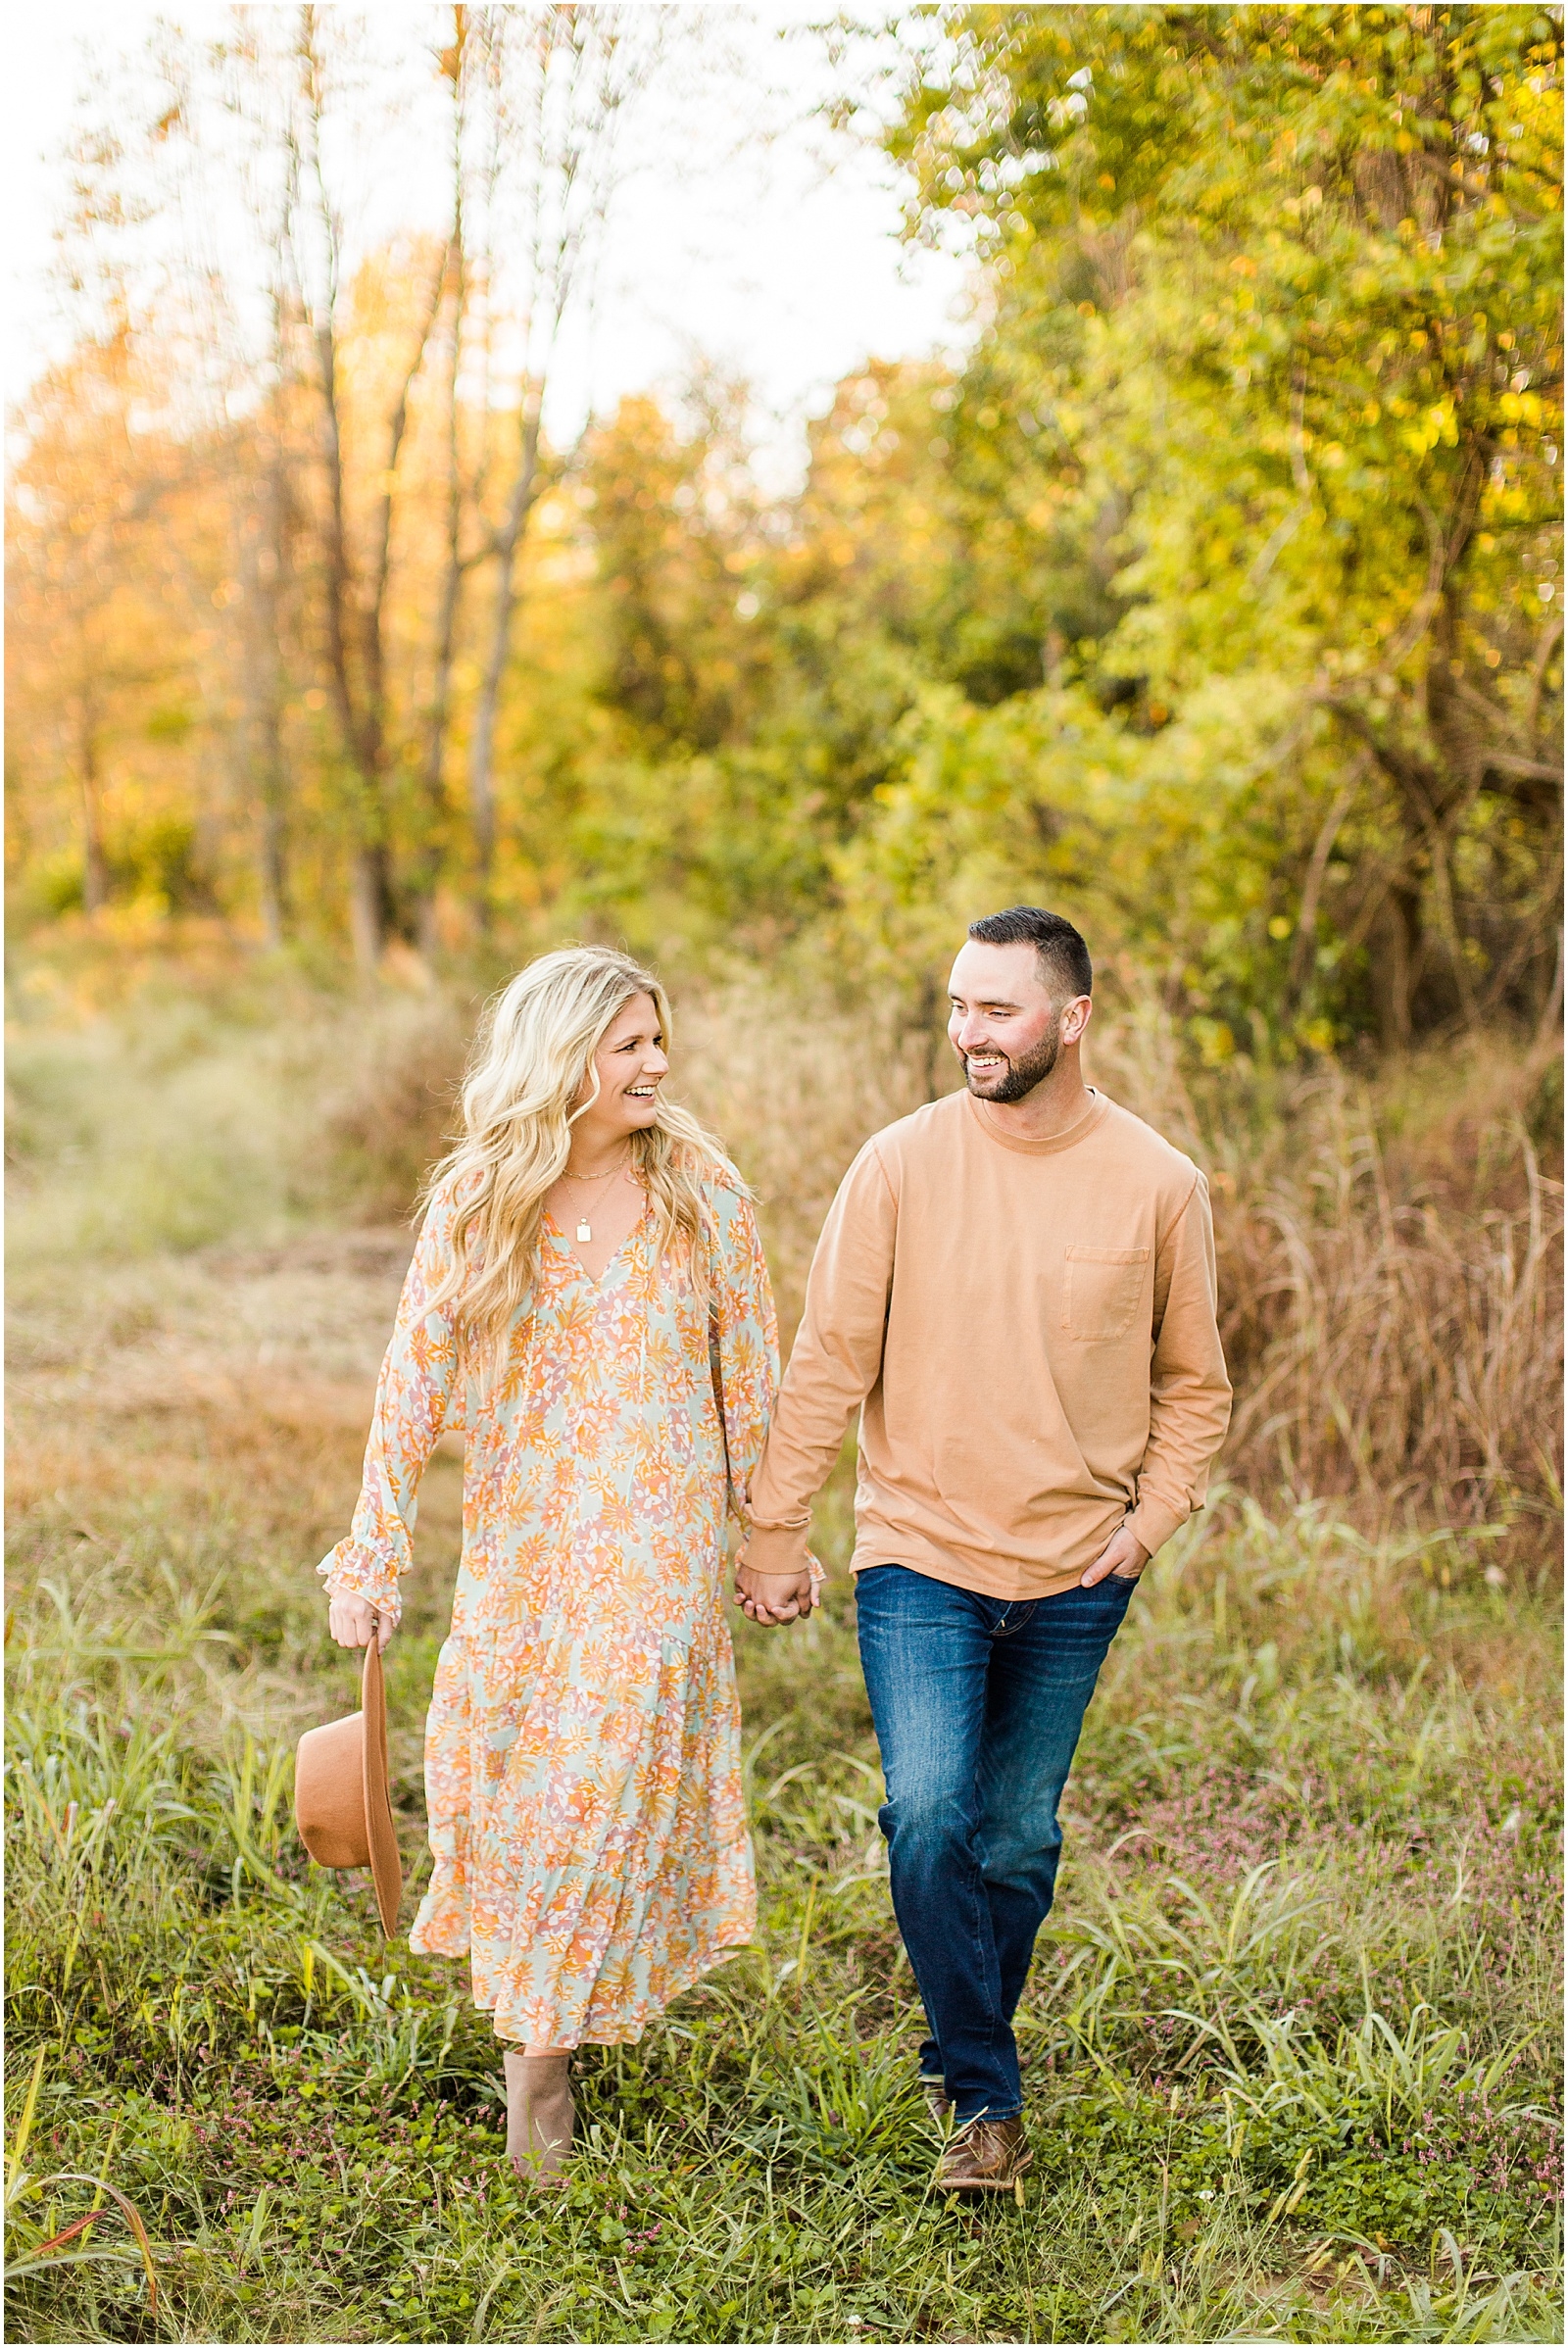 A Southern Indiana Engagement Session | Charleston and Erin | Bret and Brandie Photography020.jpg